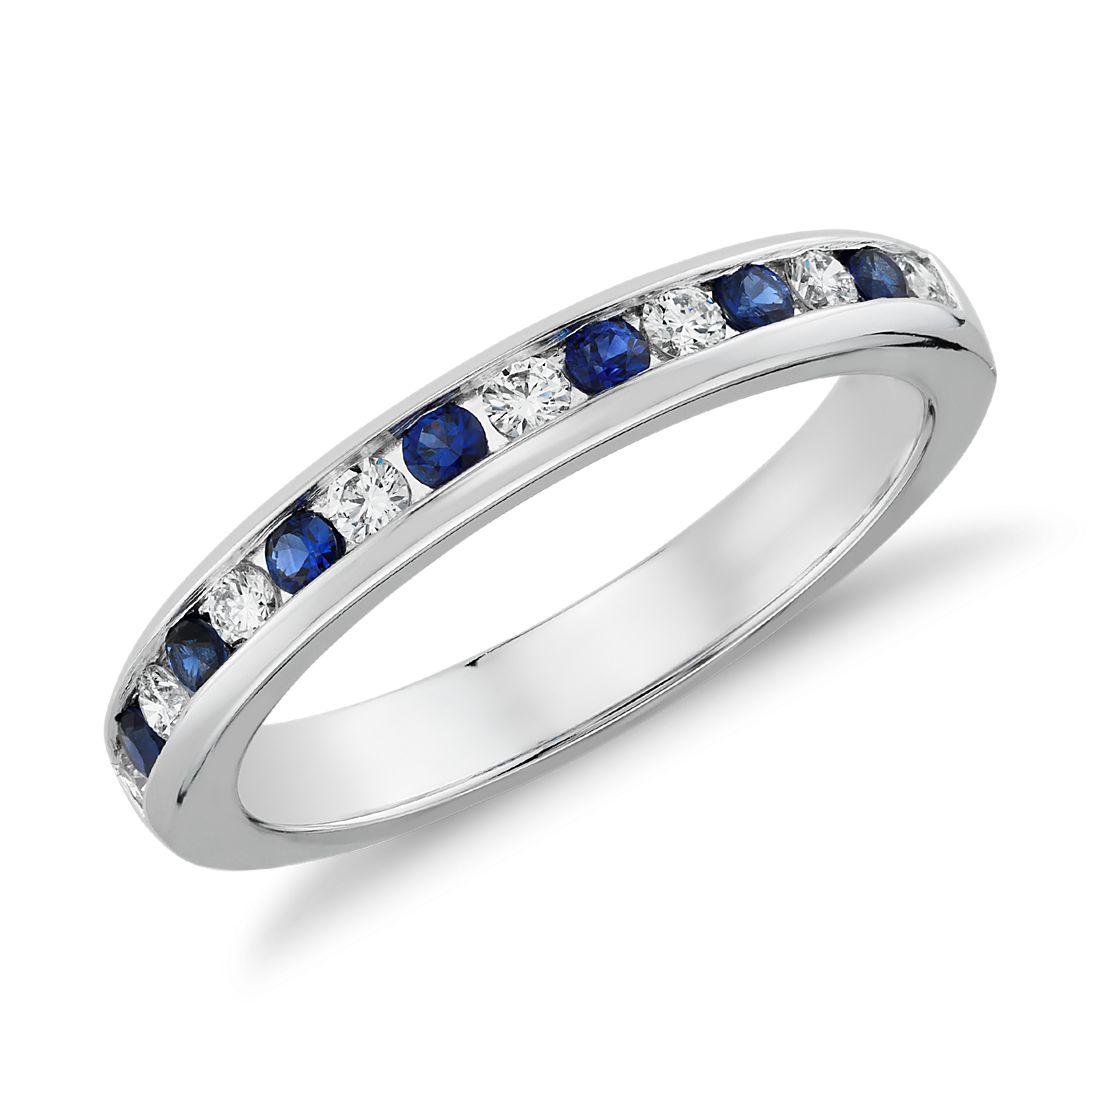 Channel Set Sapphire and Diamond Ring in 18k White Gold (0.18 ct. tw.) Blue Nile